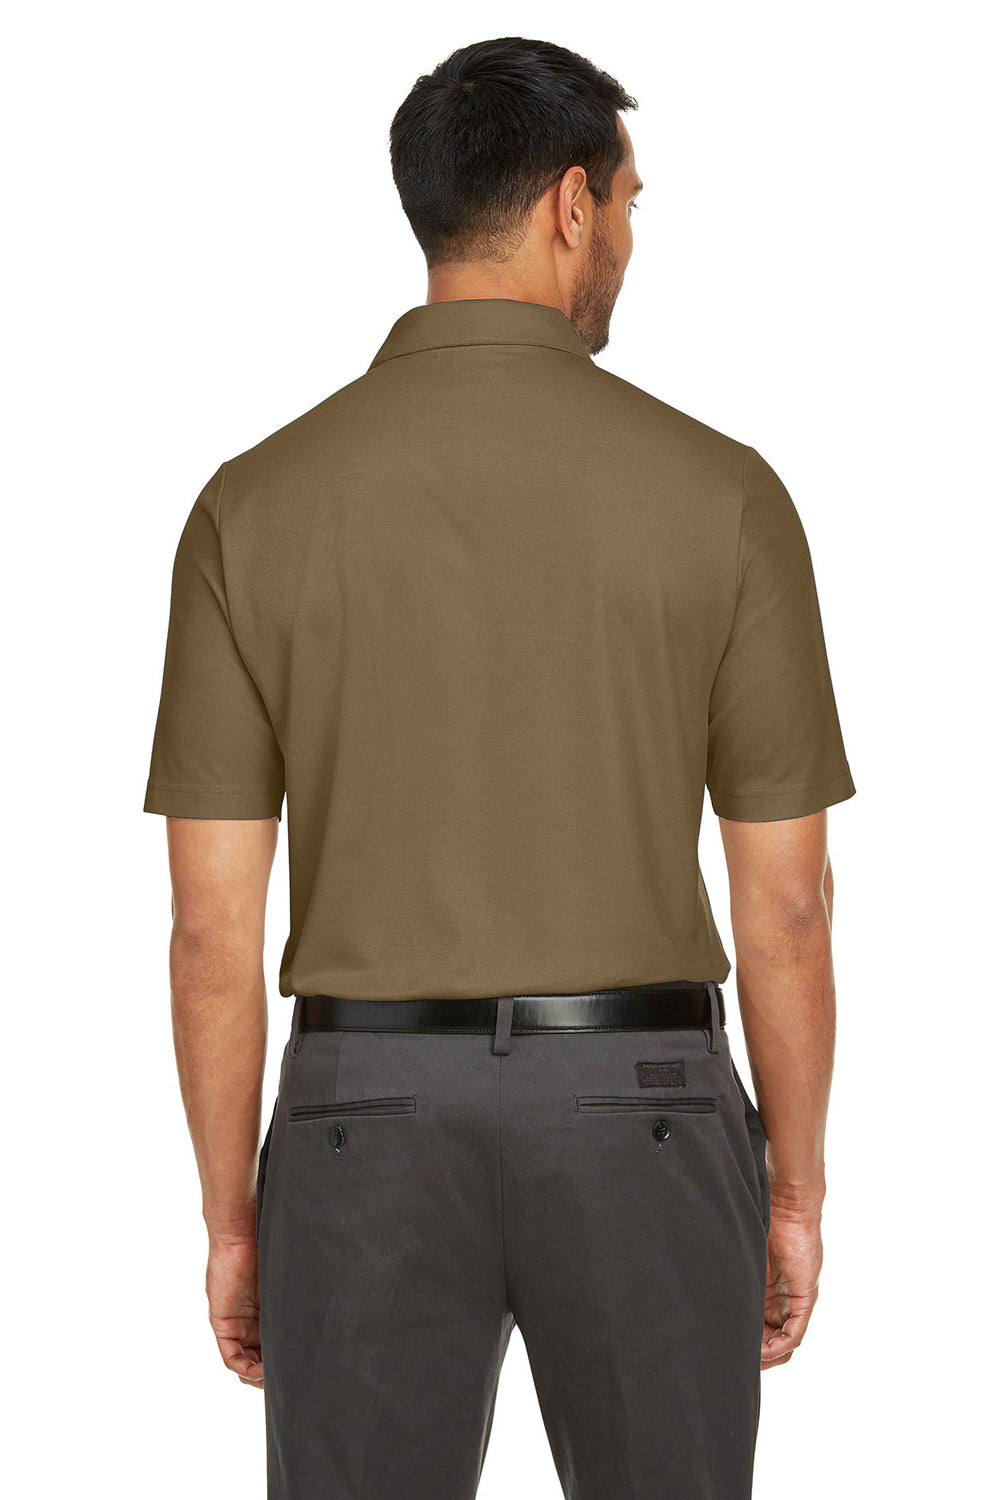 Core 365 CE112 Mens Fusion ChromaSoft Performance Moisture Wicking Short Sleeve Polo Shirt Coyote Brown Back